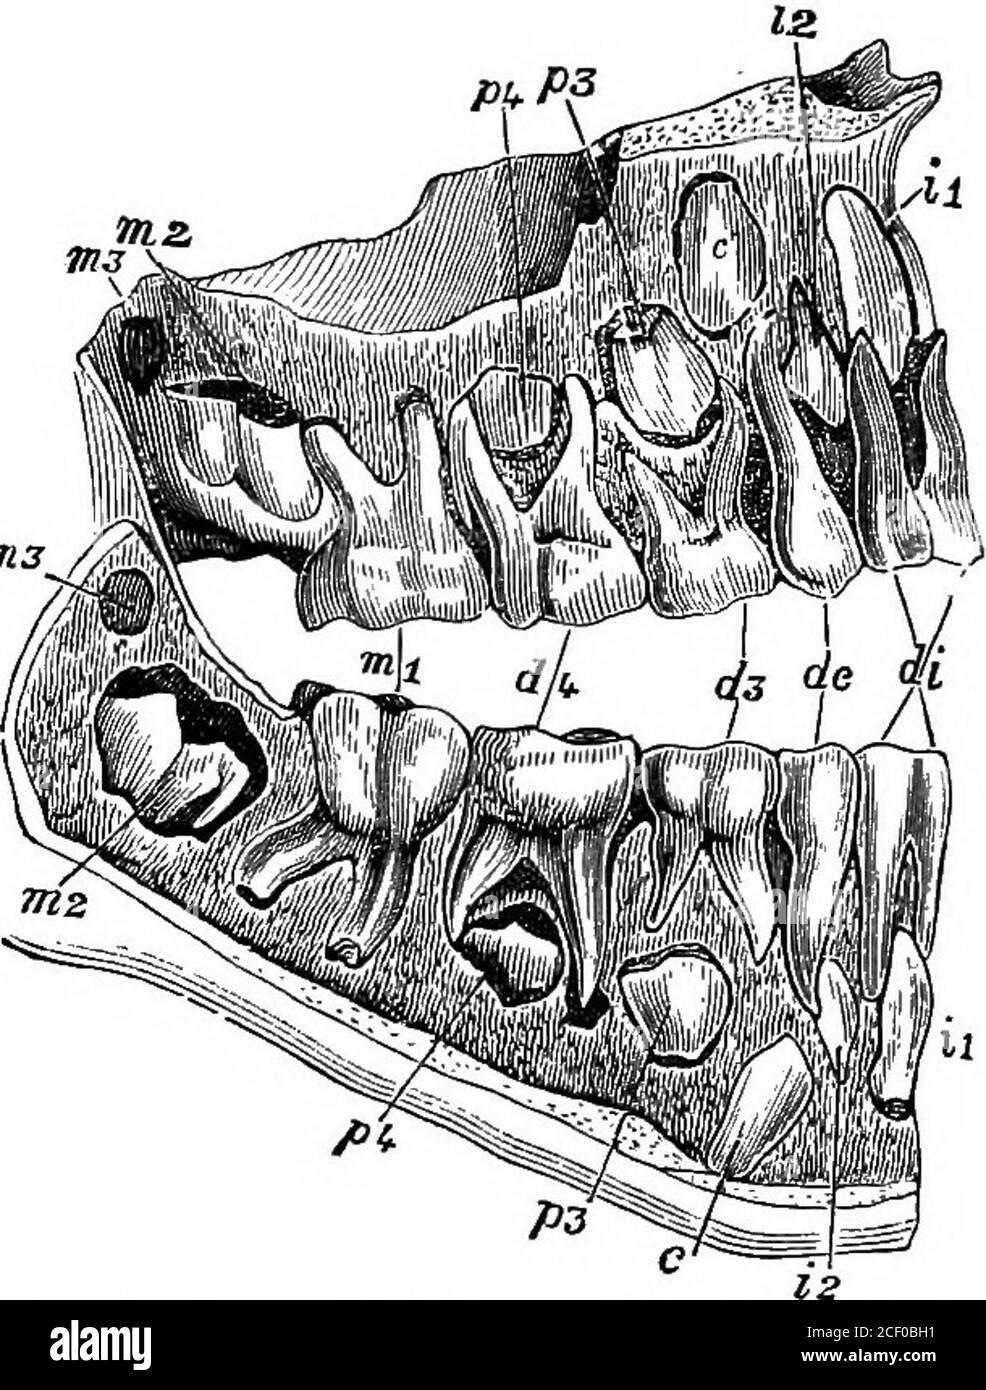 . Human physiology. Fig. 85. — Showing thefour kinds of HumanTeeth. x, incisor tooth (exterior view) ;2, canine tooth (exteriorview) ; 3, bicuspid tooth (sideview showing the two cusps);4, molar tooth (exterior view). Fig. 86.—Section of the Jaws of a Child of 61Years, showing the Milk or Deciduous Teeth,also the Permanent Teeth in Process ofFormation. di, the milk incisors ; dc, the milk canines ; &lt;£}, and di,, themilk molars; zi and iz, the permanent incisors; £,thepermanent canines ; ^3 and /.), the permanent bicuspids;mi, the first permanent molars, which have already madetheir appearan Stock Photo